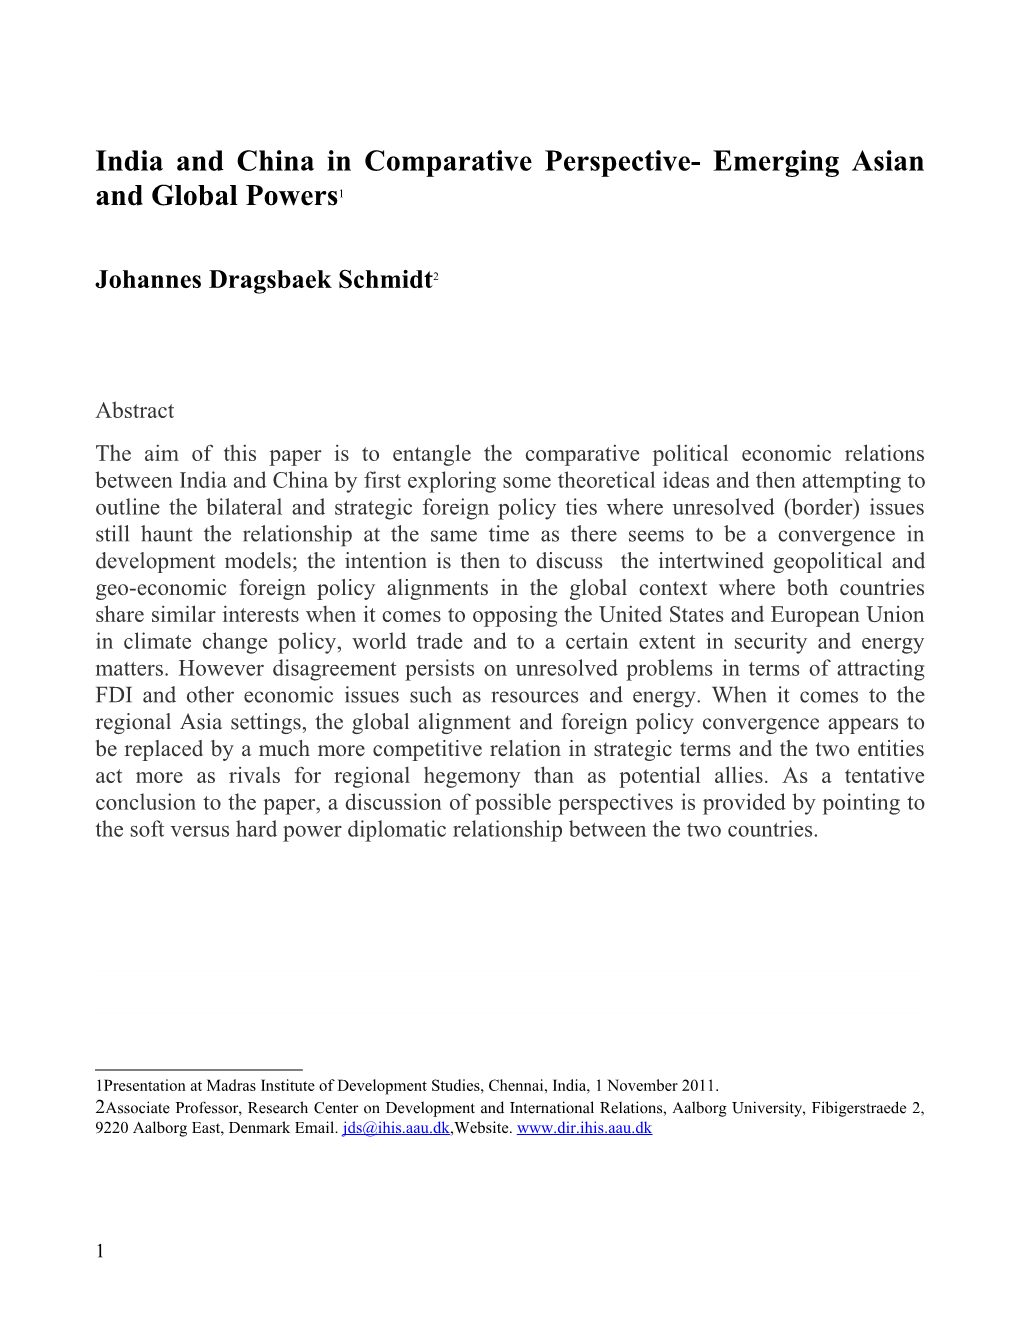 India and China in Comparative Perspective- Emerging Asian and Global Powers